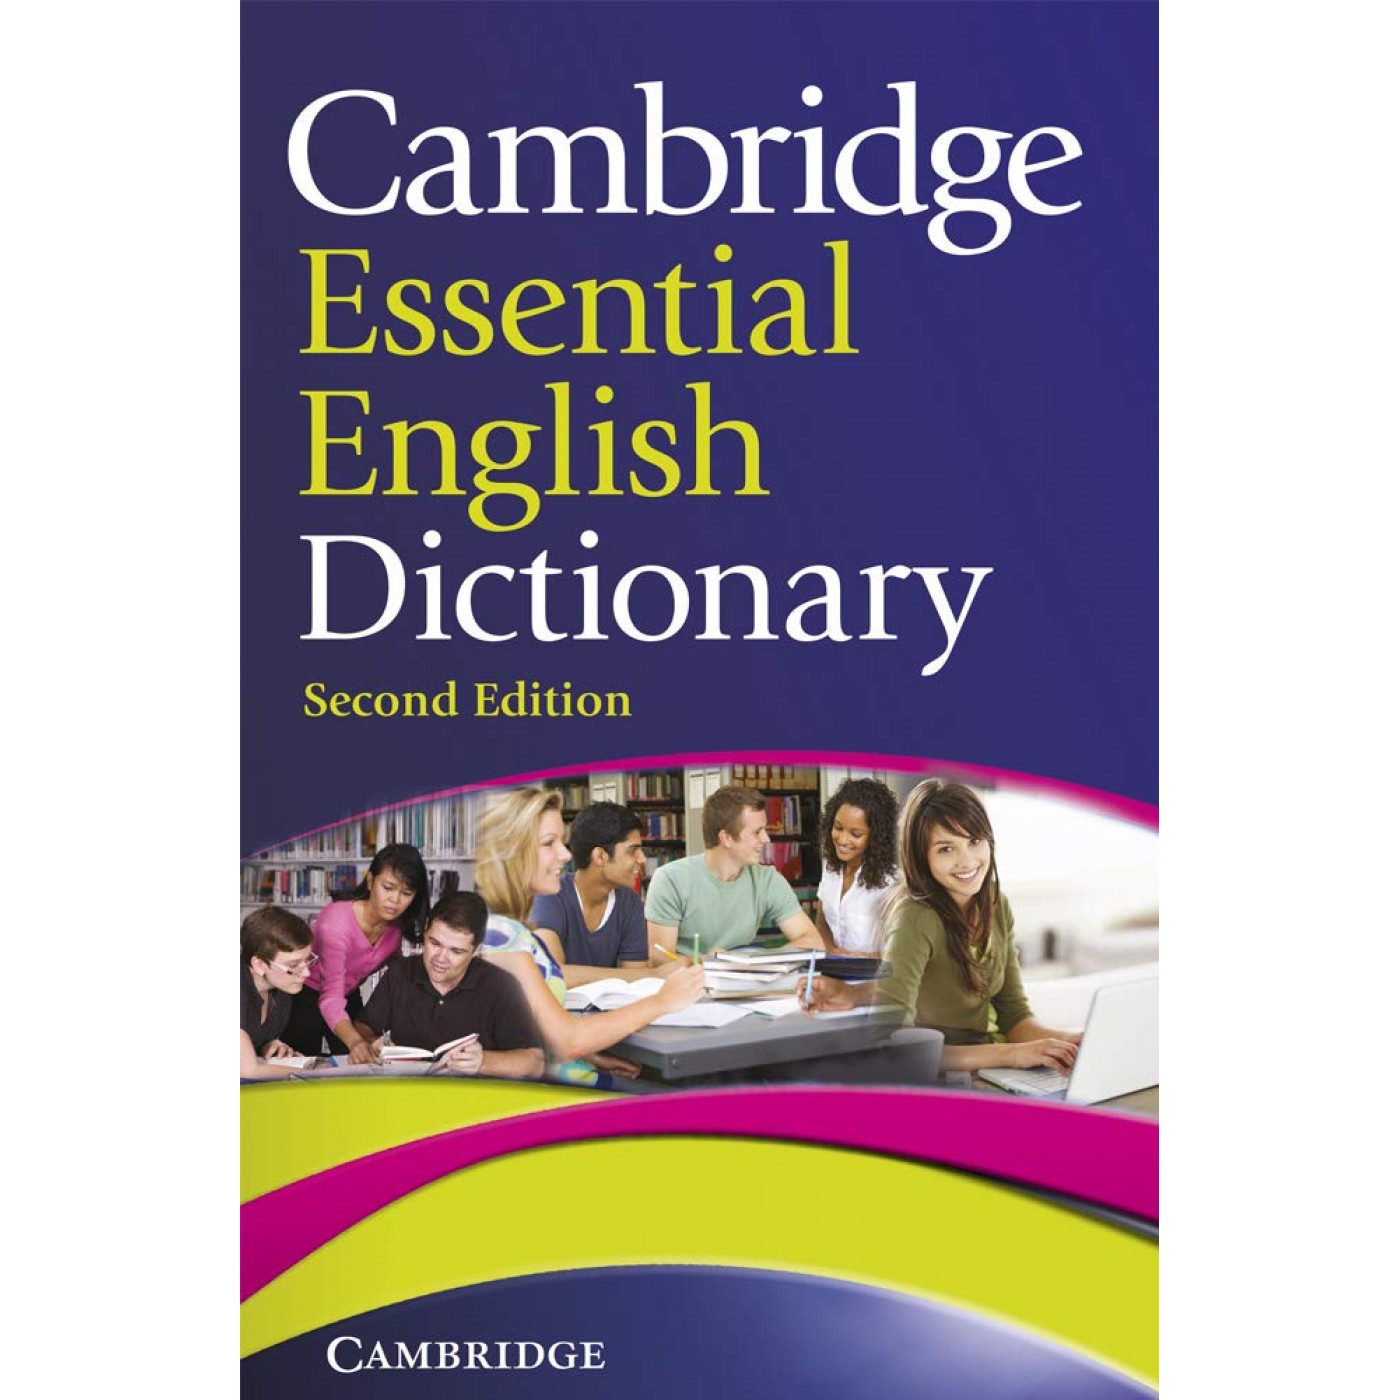 2nd　Essential　Dictionary　English　Cambridge　Ed.